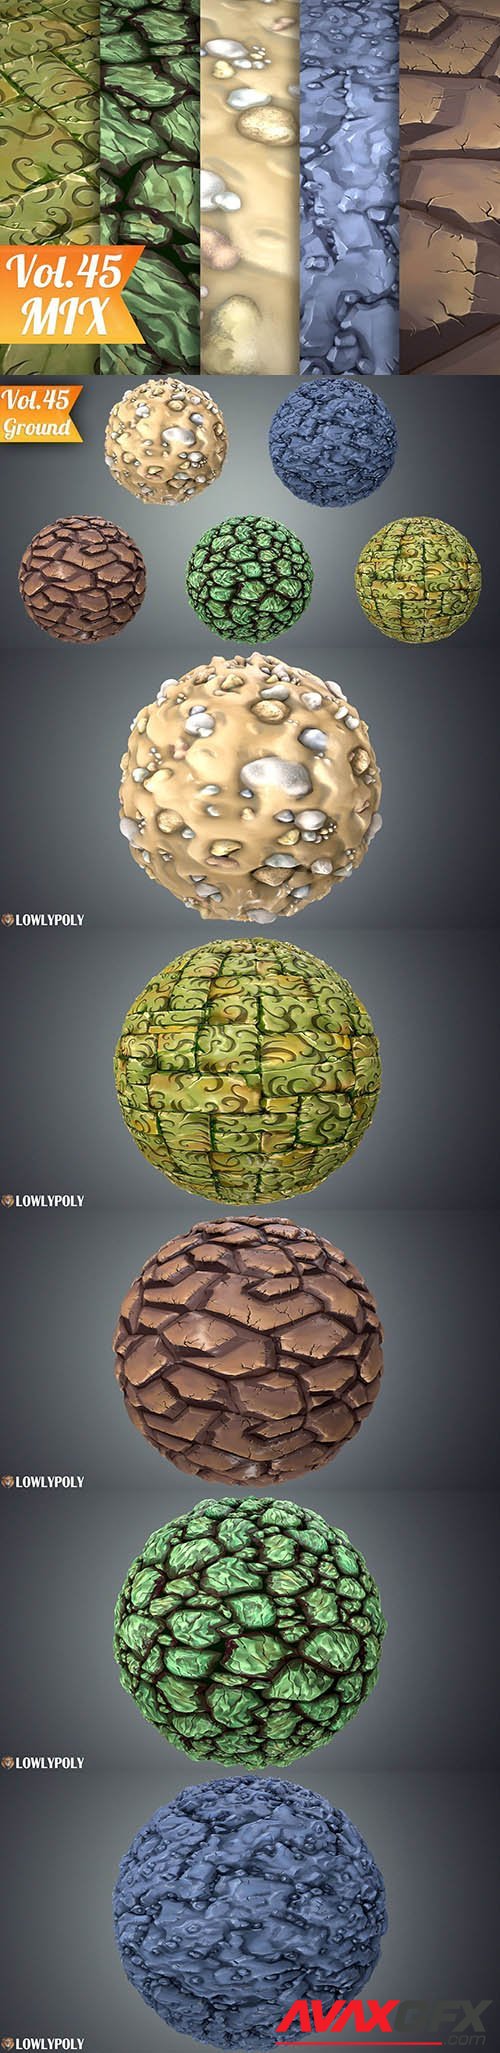 Cgtrader - Stylized Ground Vol 45 - Hand Painted Texture Pack Texture